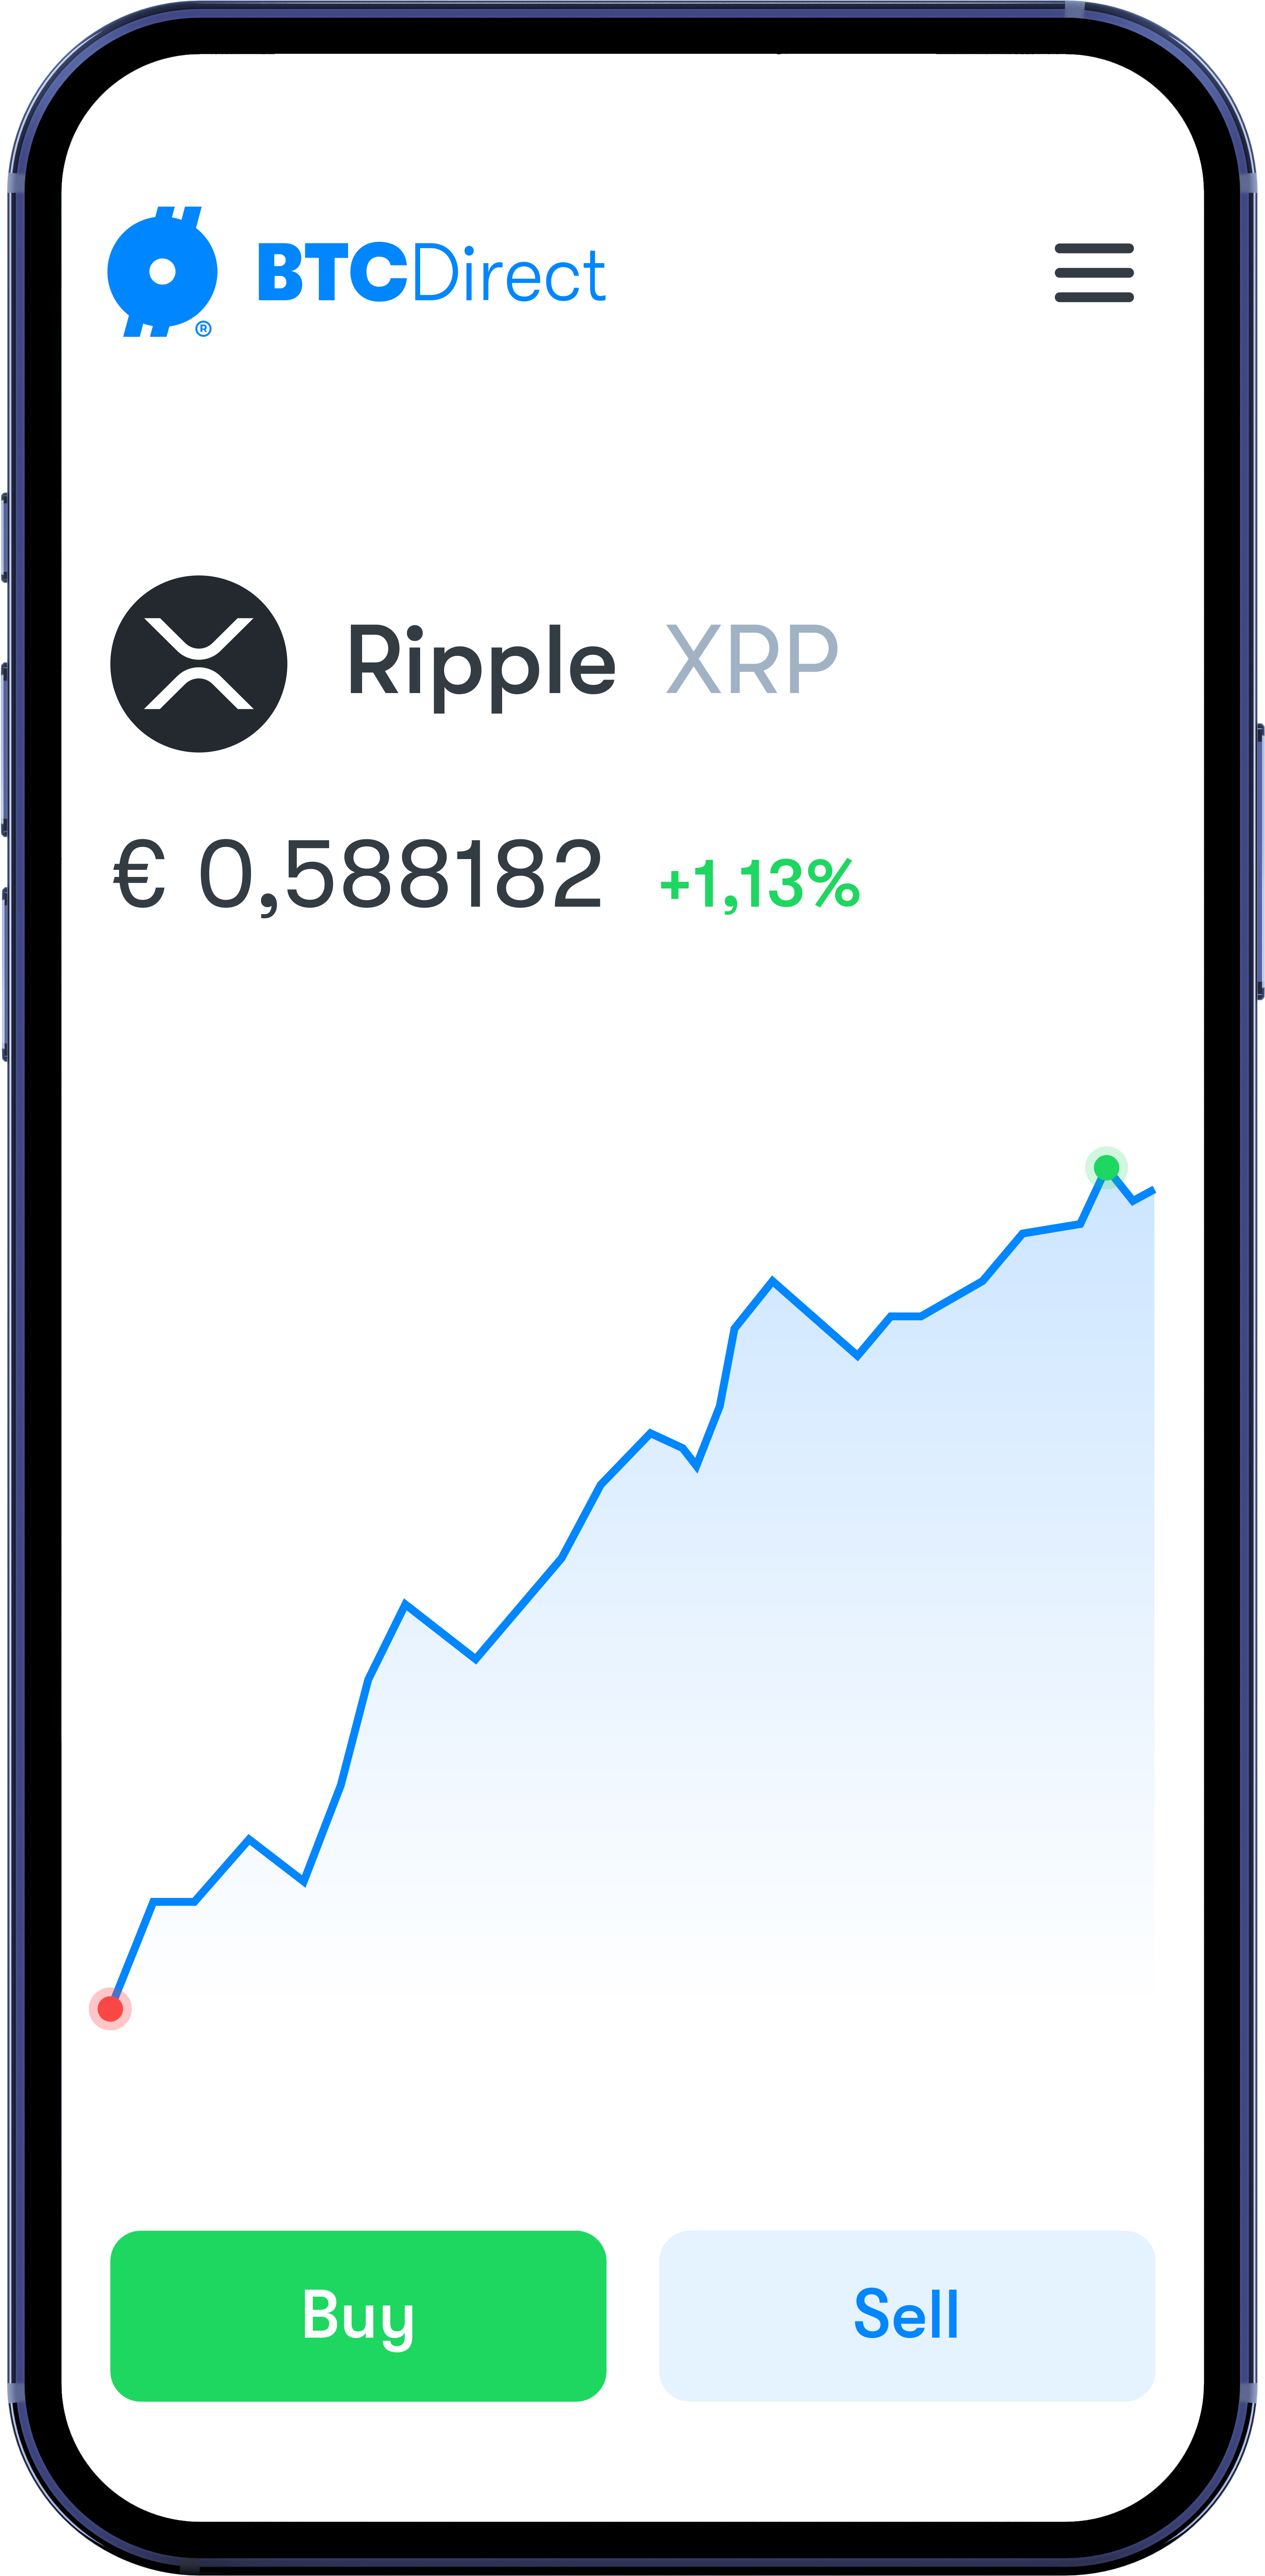 Buying Ripple is easy